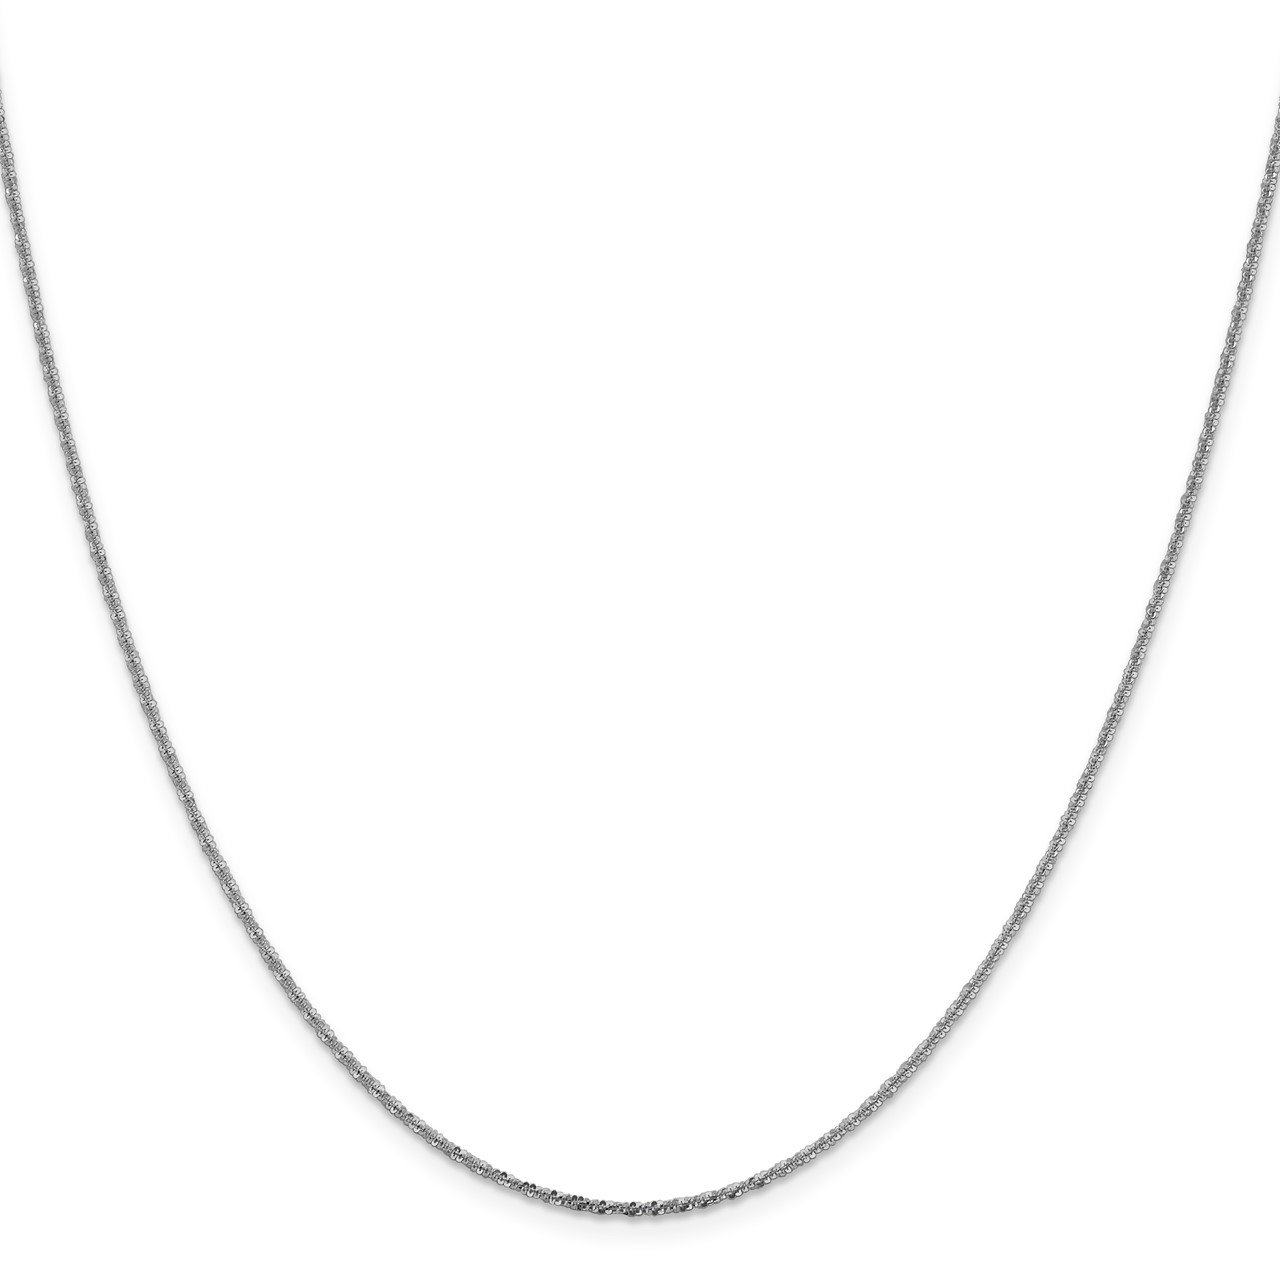 Leslie's 14K White Gold 1.5mm Cyclone Chain